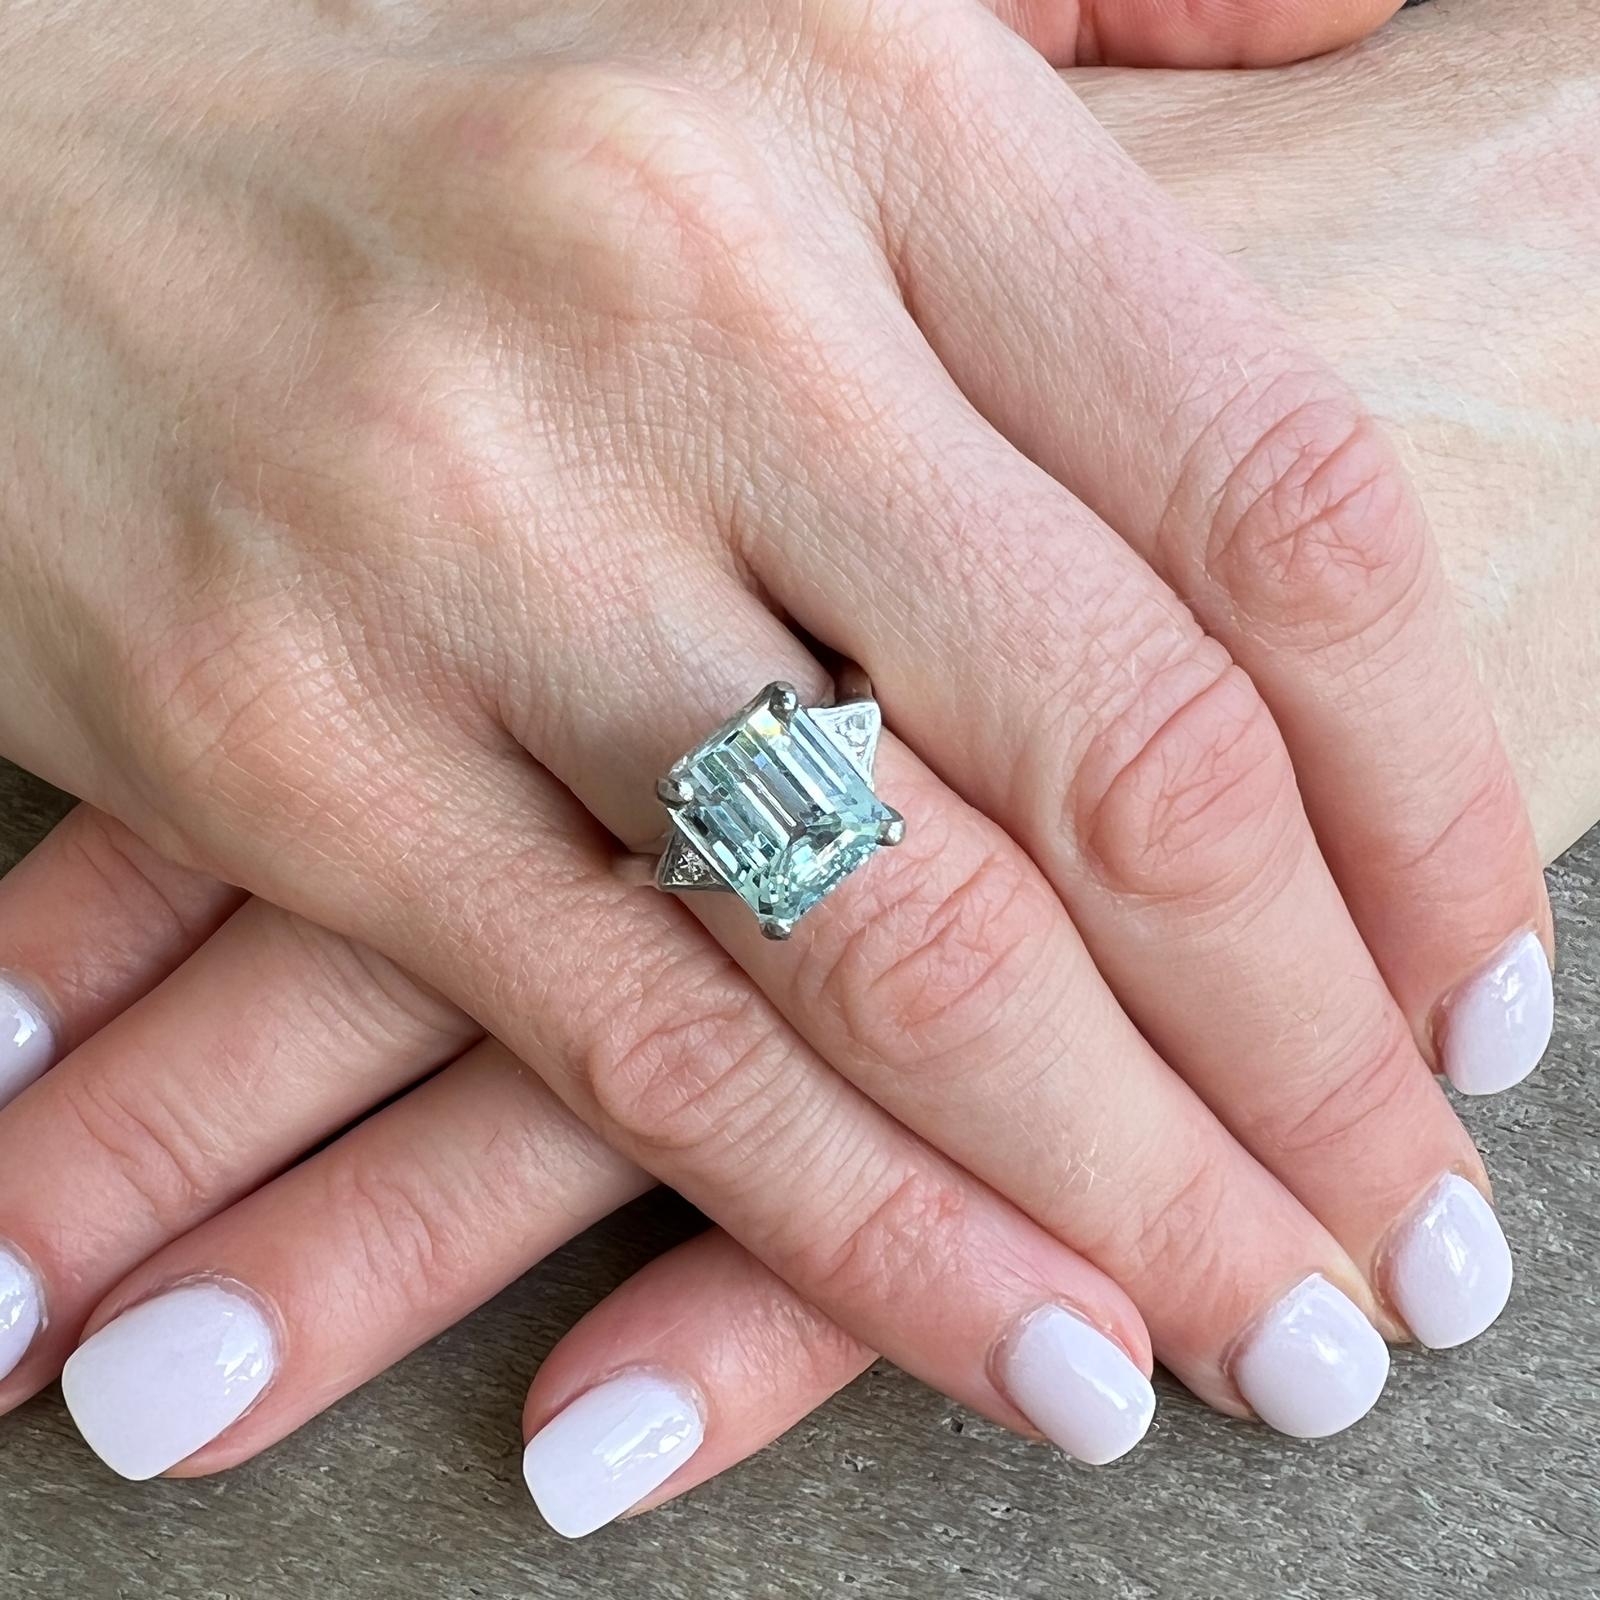 Beautiful natural aquamarine and diamond cocktail ring crafted in 14 karat white gold. The ring features an approximately 3.50 carat emerald cut natural blue aquamarine gemstone flanked with two round brilliant cut diamonds weighing approximately